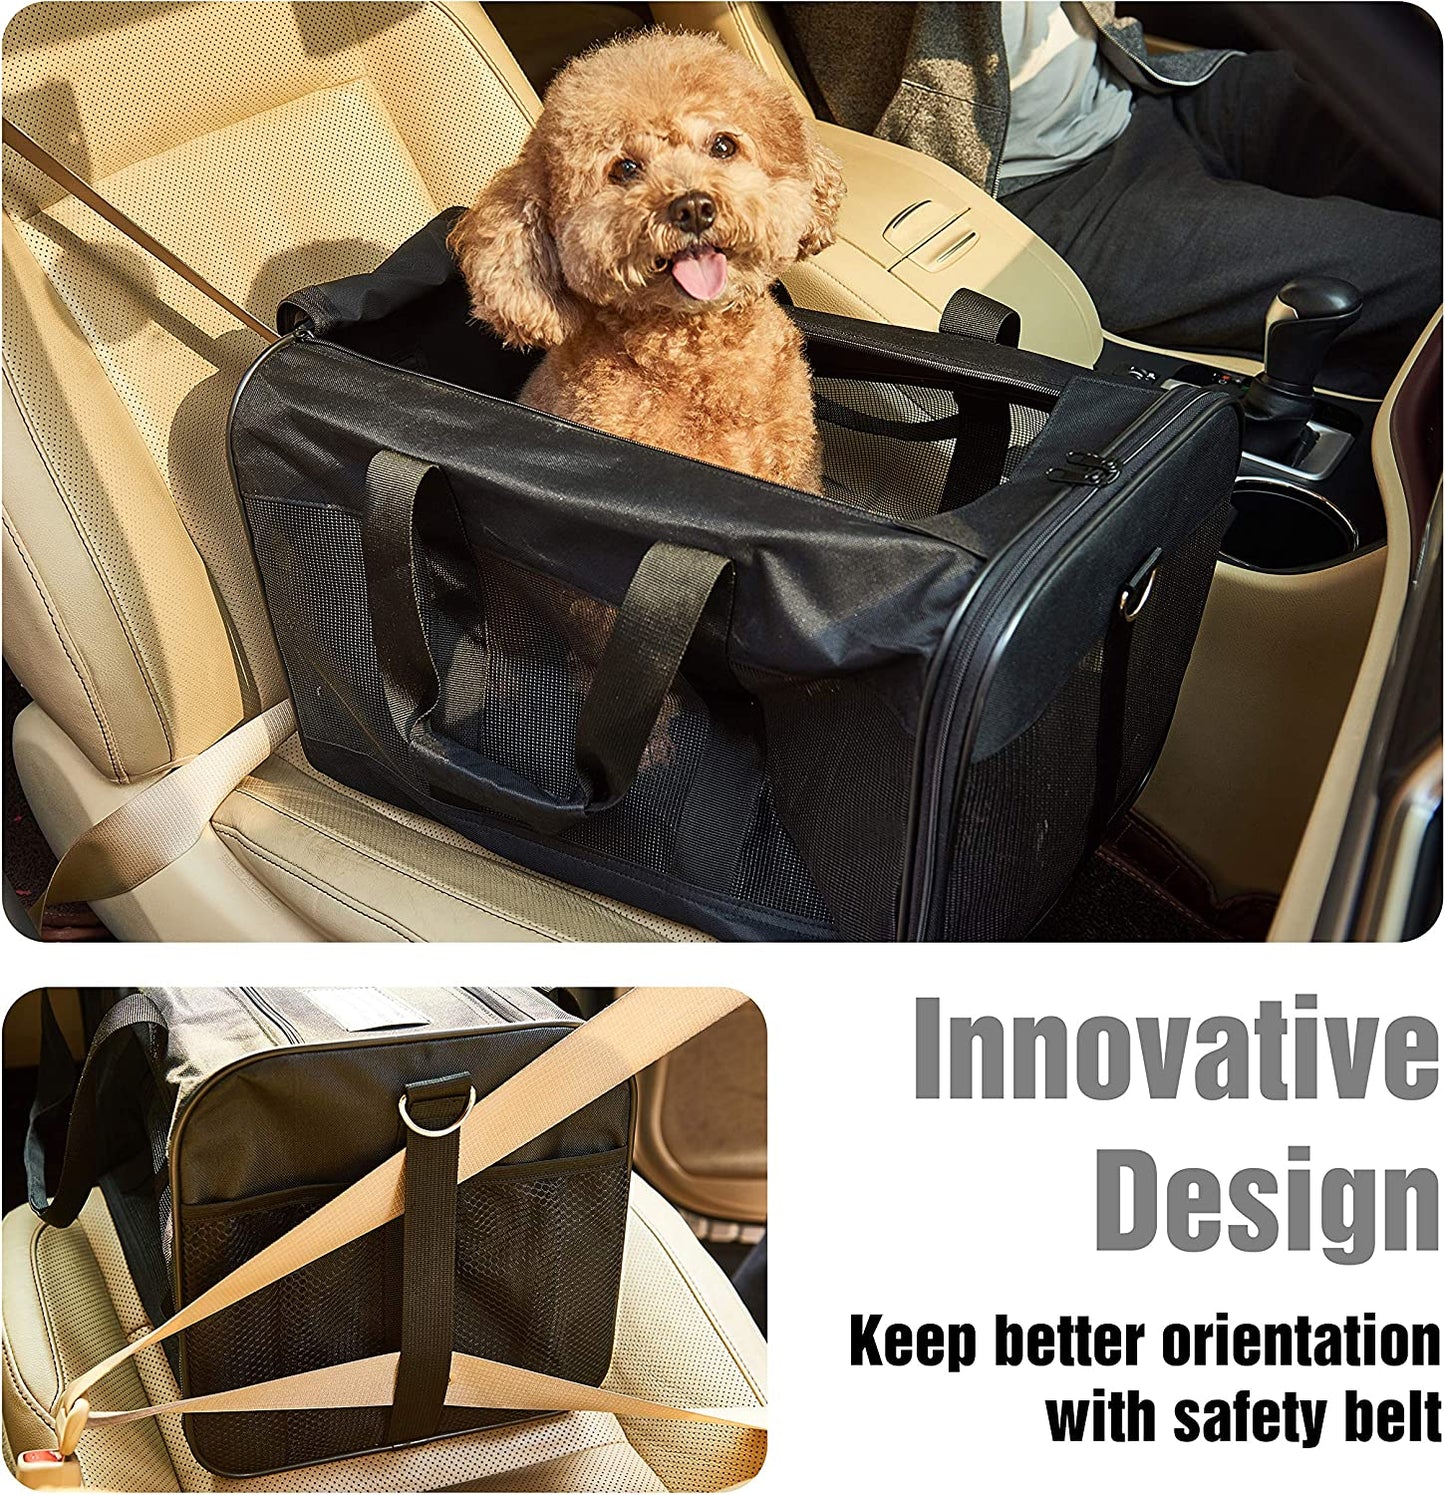 Pet Travel Carrier Soft Sided Portable Bag for Cats, Small Dogs, Kittens or Puppies, Collapsible, Durable, Airline Approved, Travel Friendly, Carry Your Pet with You Safely and Comfortably